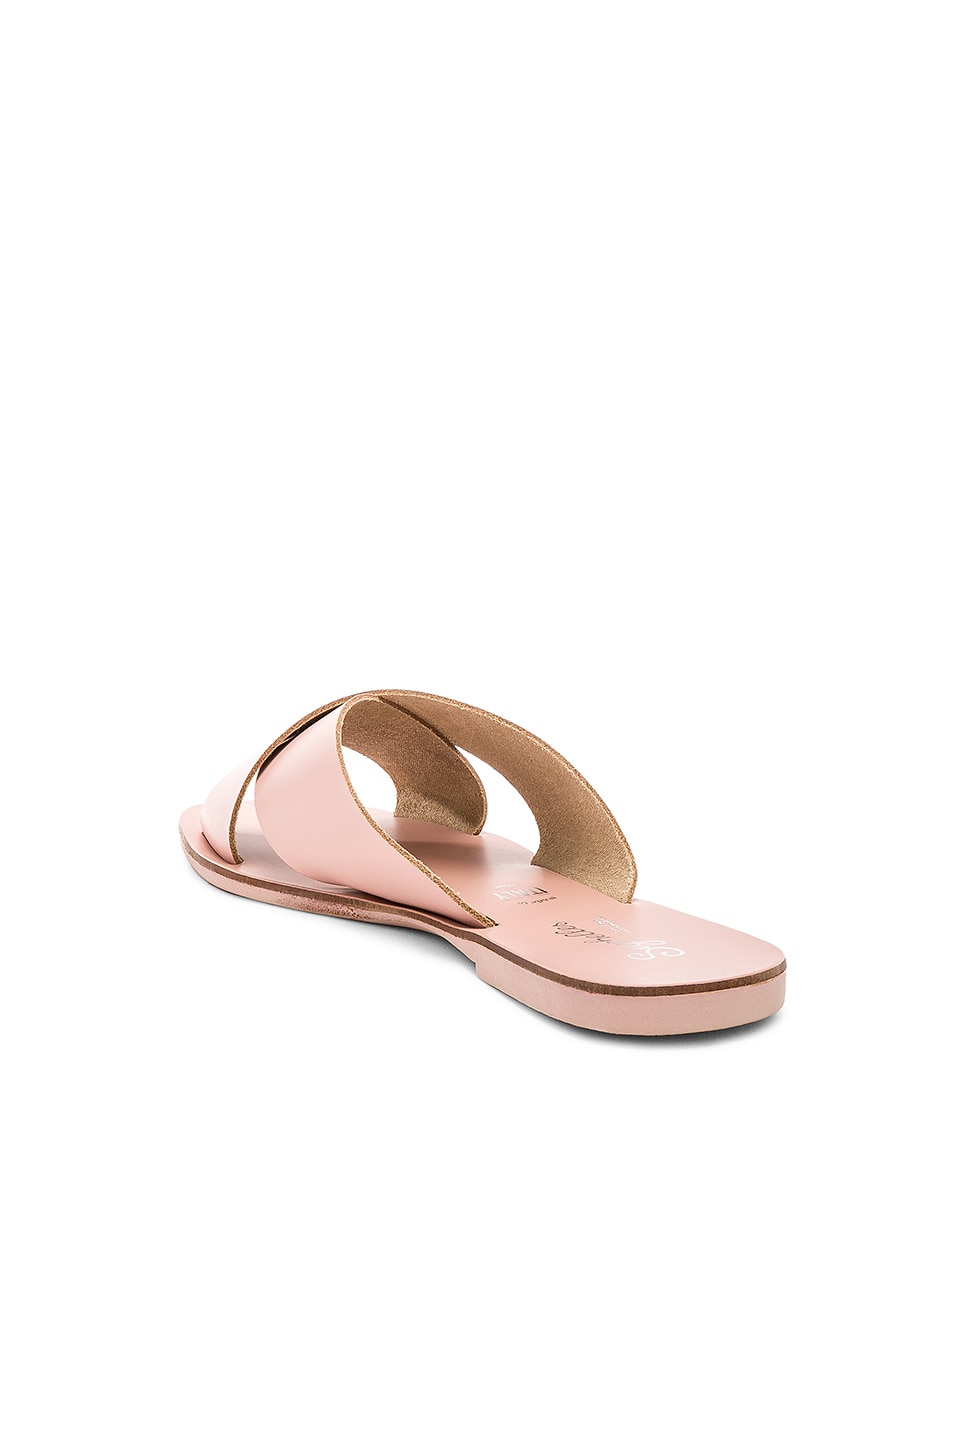 Seychelles Total Relaxation Sandals in Pink | REVOLVE